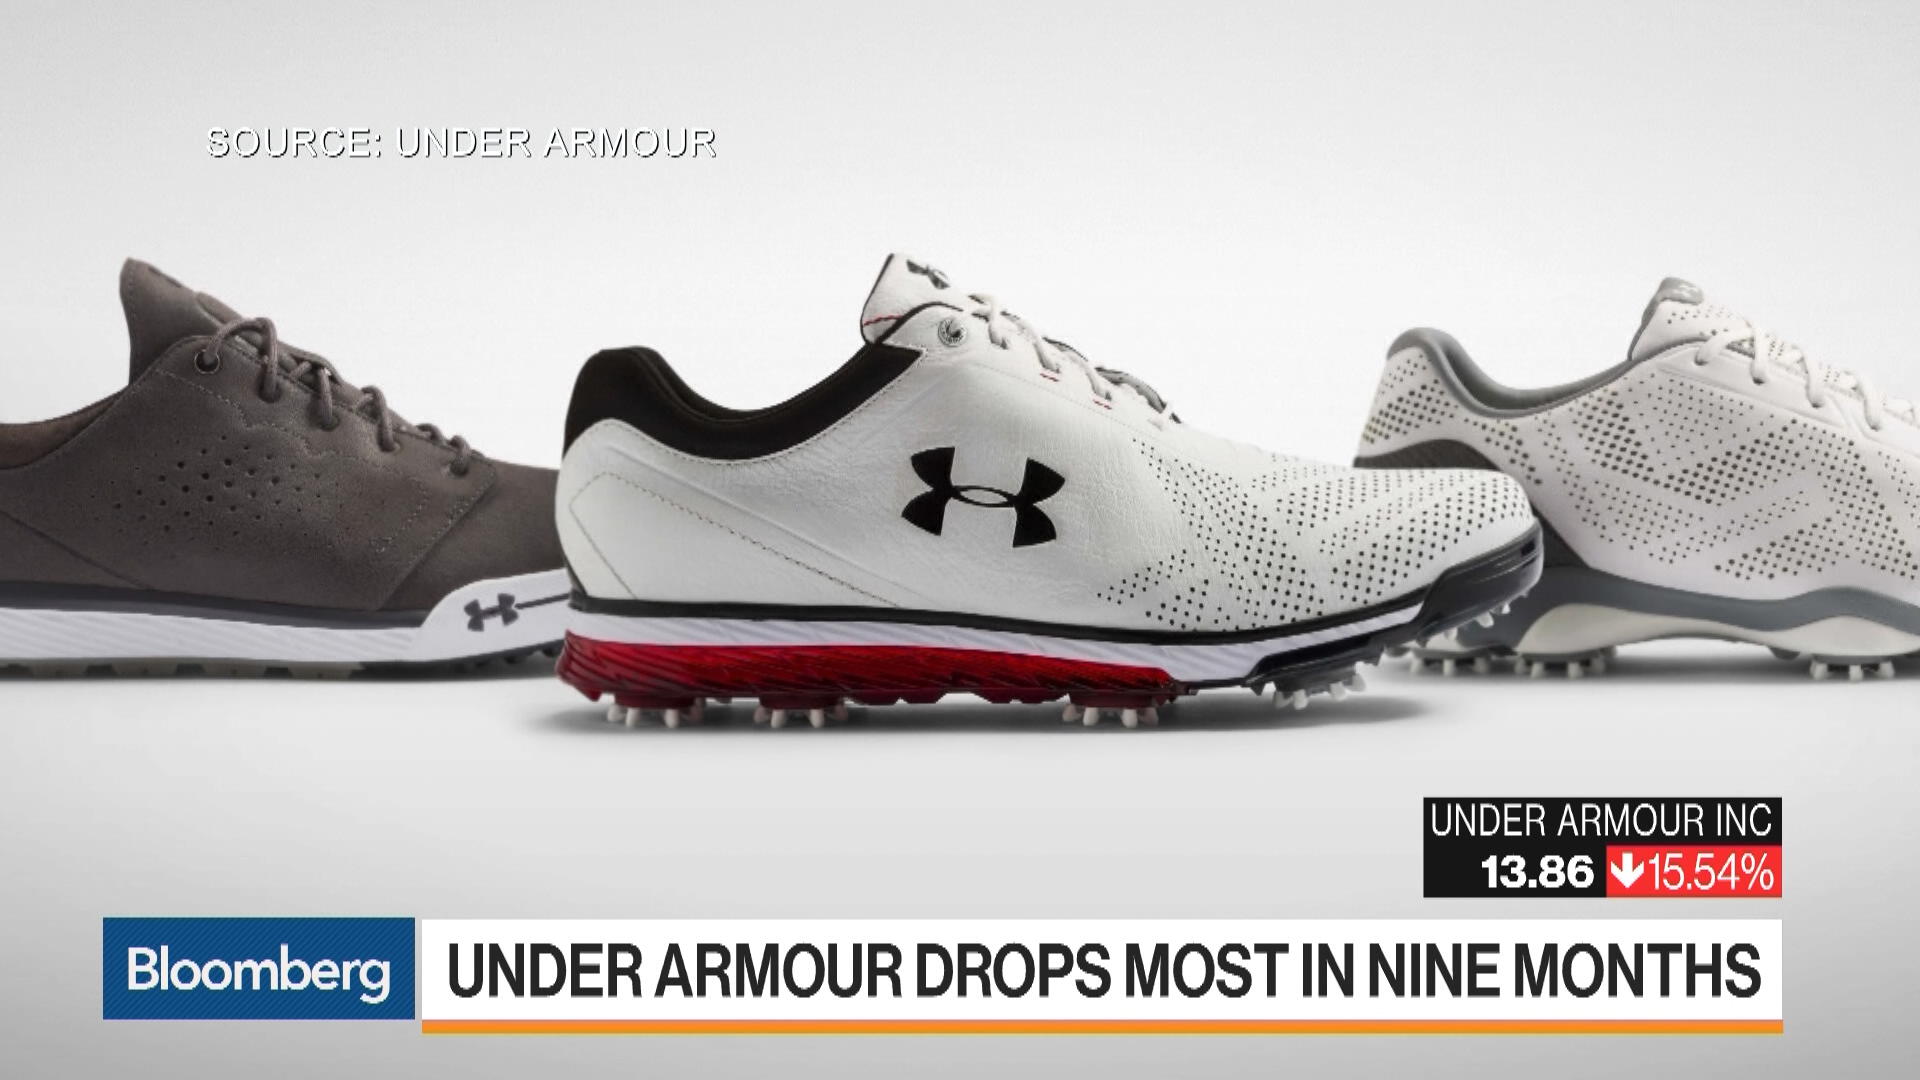 under armour bloomberg